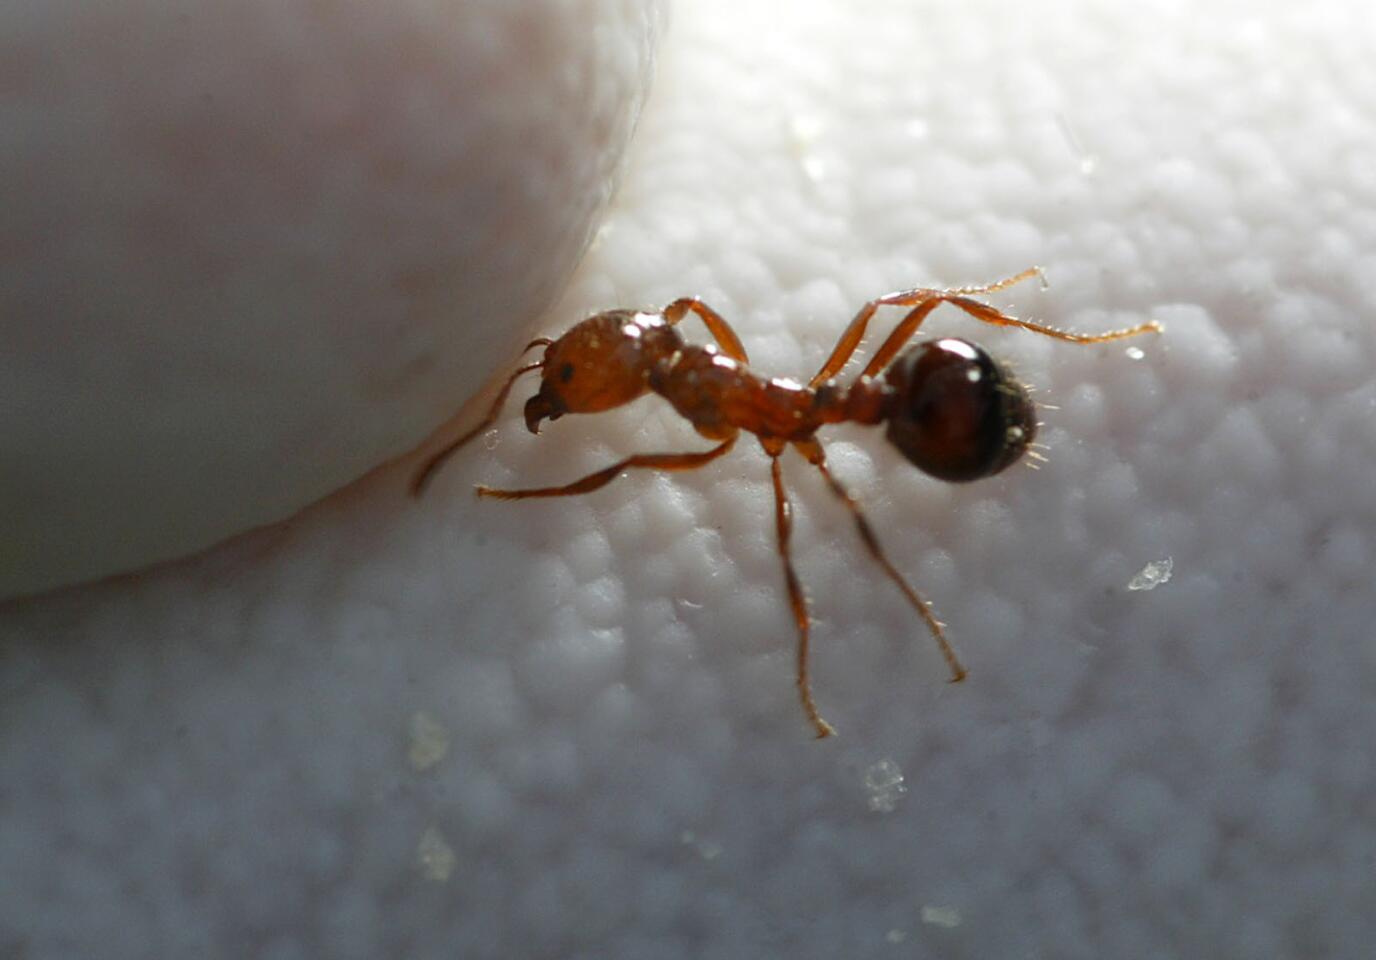 A jumbled crowd of fire ants acts like both an elastic solid and a viscous liquid - a property that holds the secrets of self-healing materials. Scientists hope the ants can help them design self-repairing bridges and self-assembling modular robots.